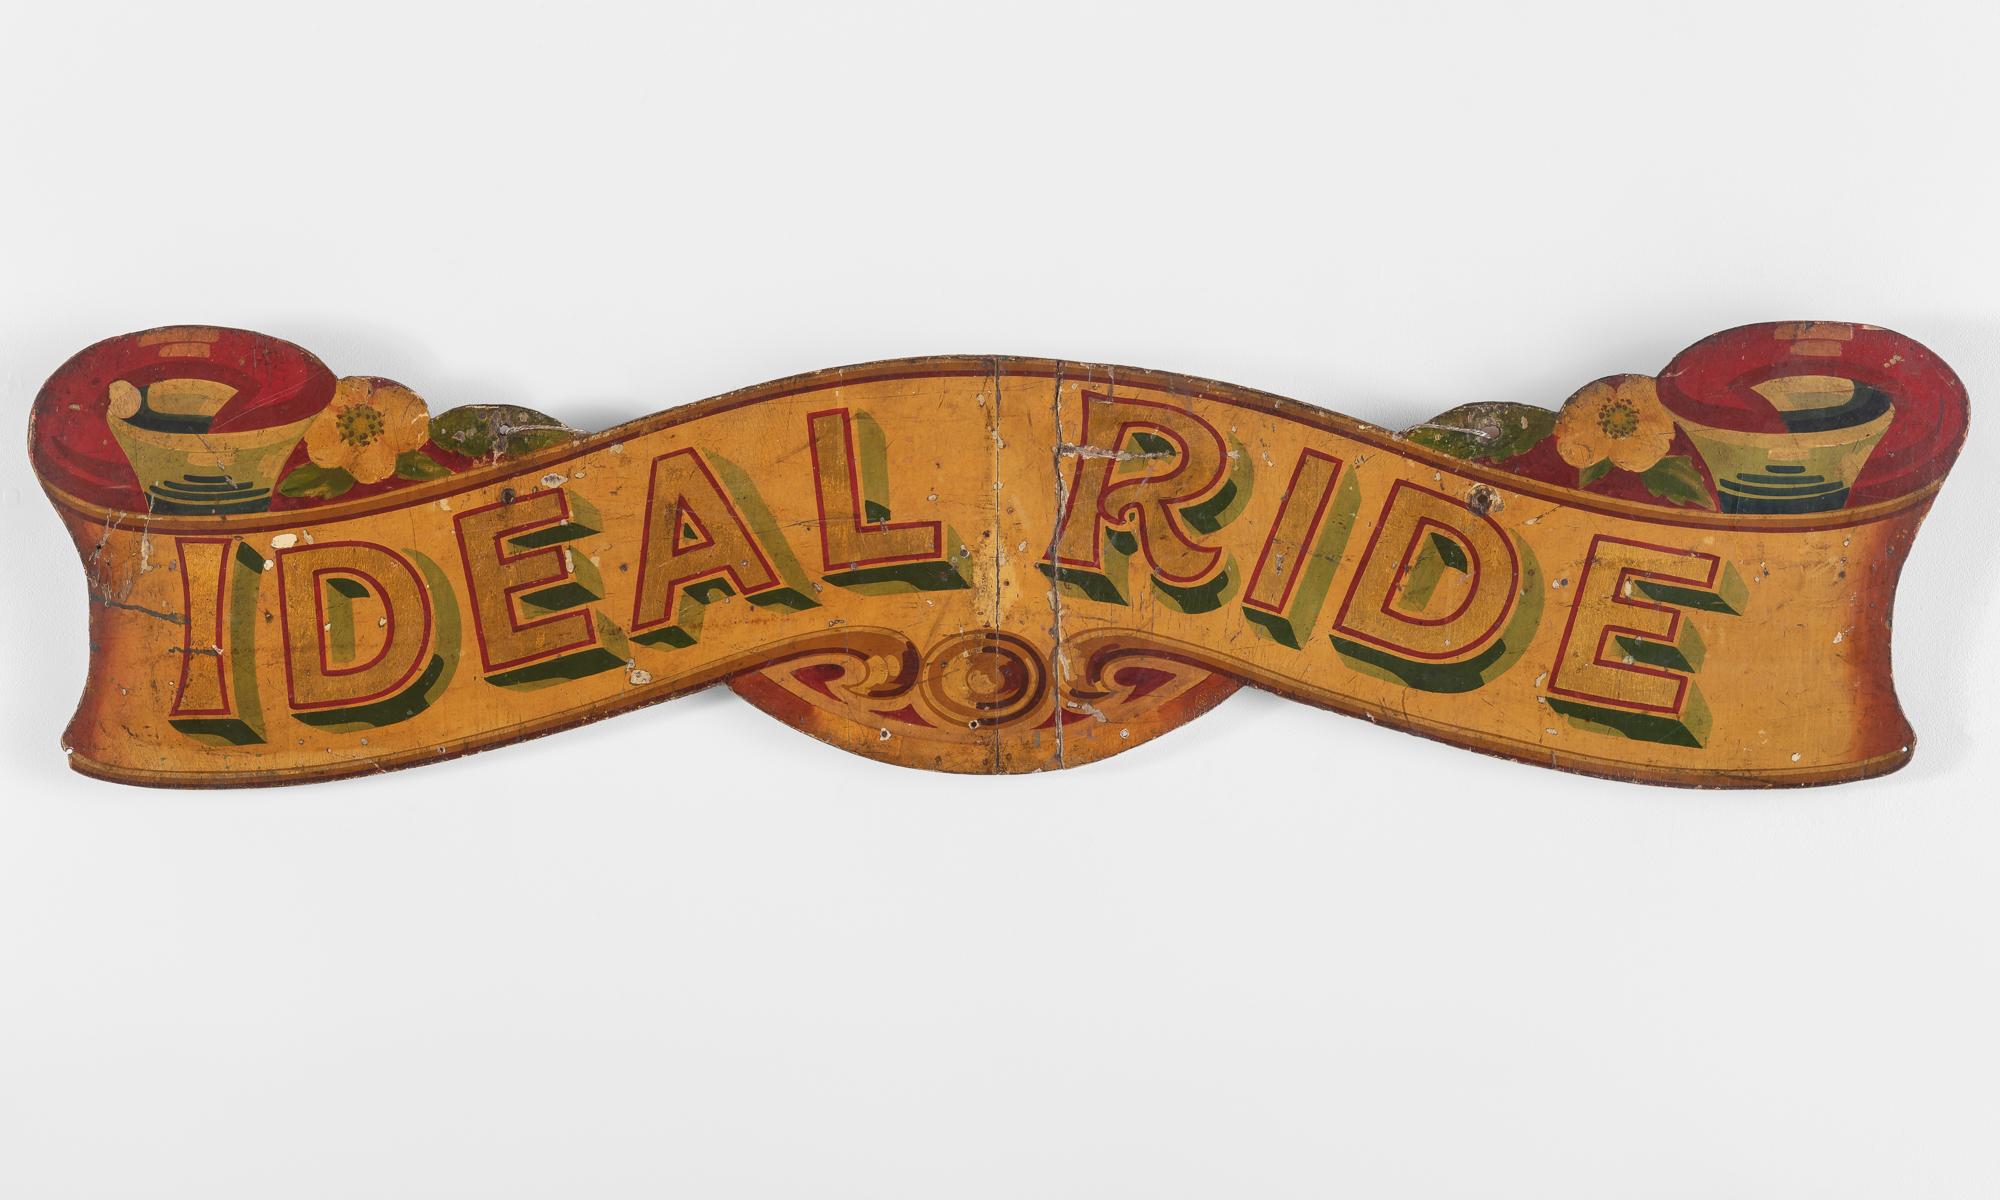 Hand-painted wooden sign, England, circa 1900.

